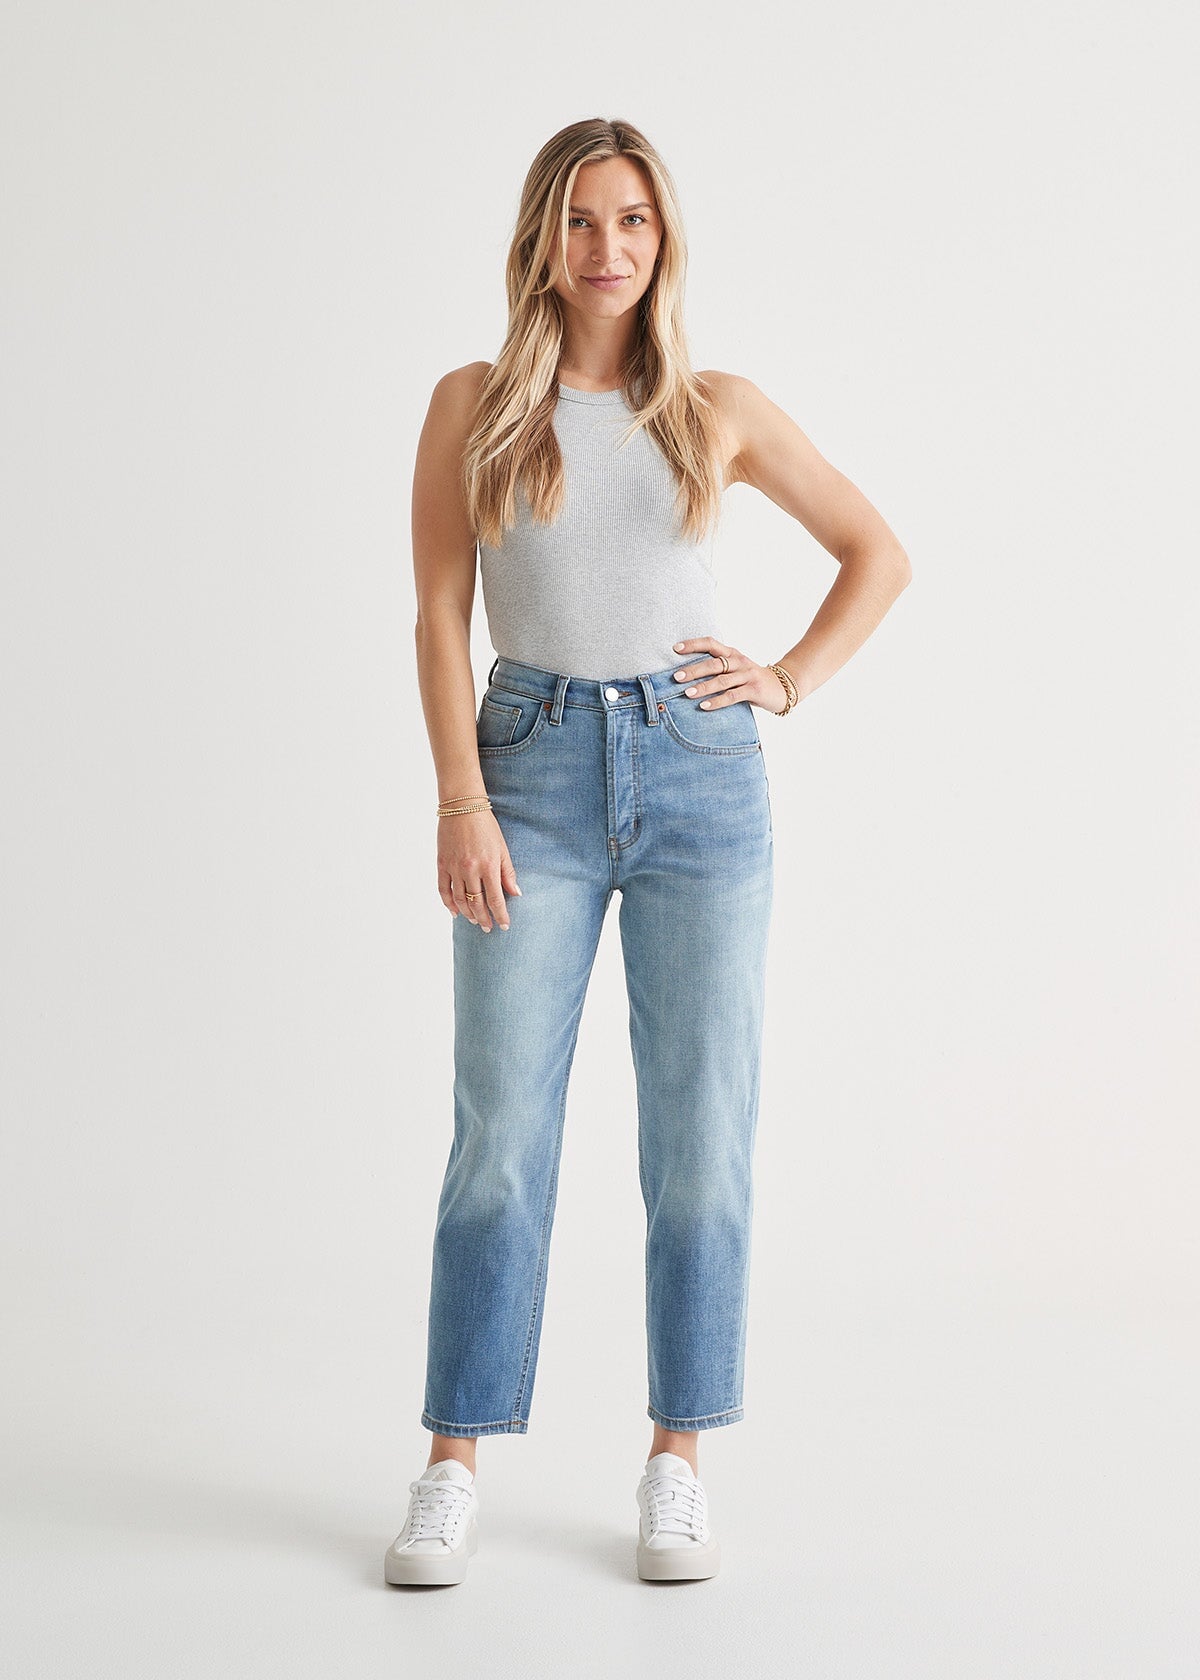 Womens's High Waisted Jeans With Gold Button Detail Mid Wash Denim